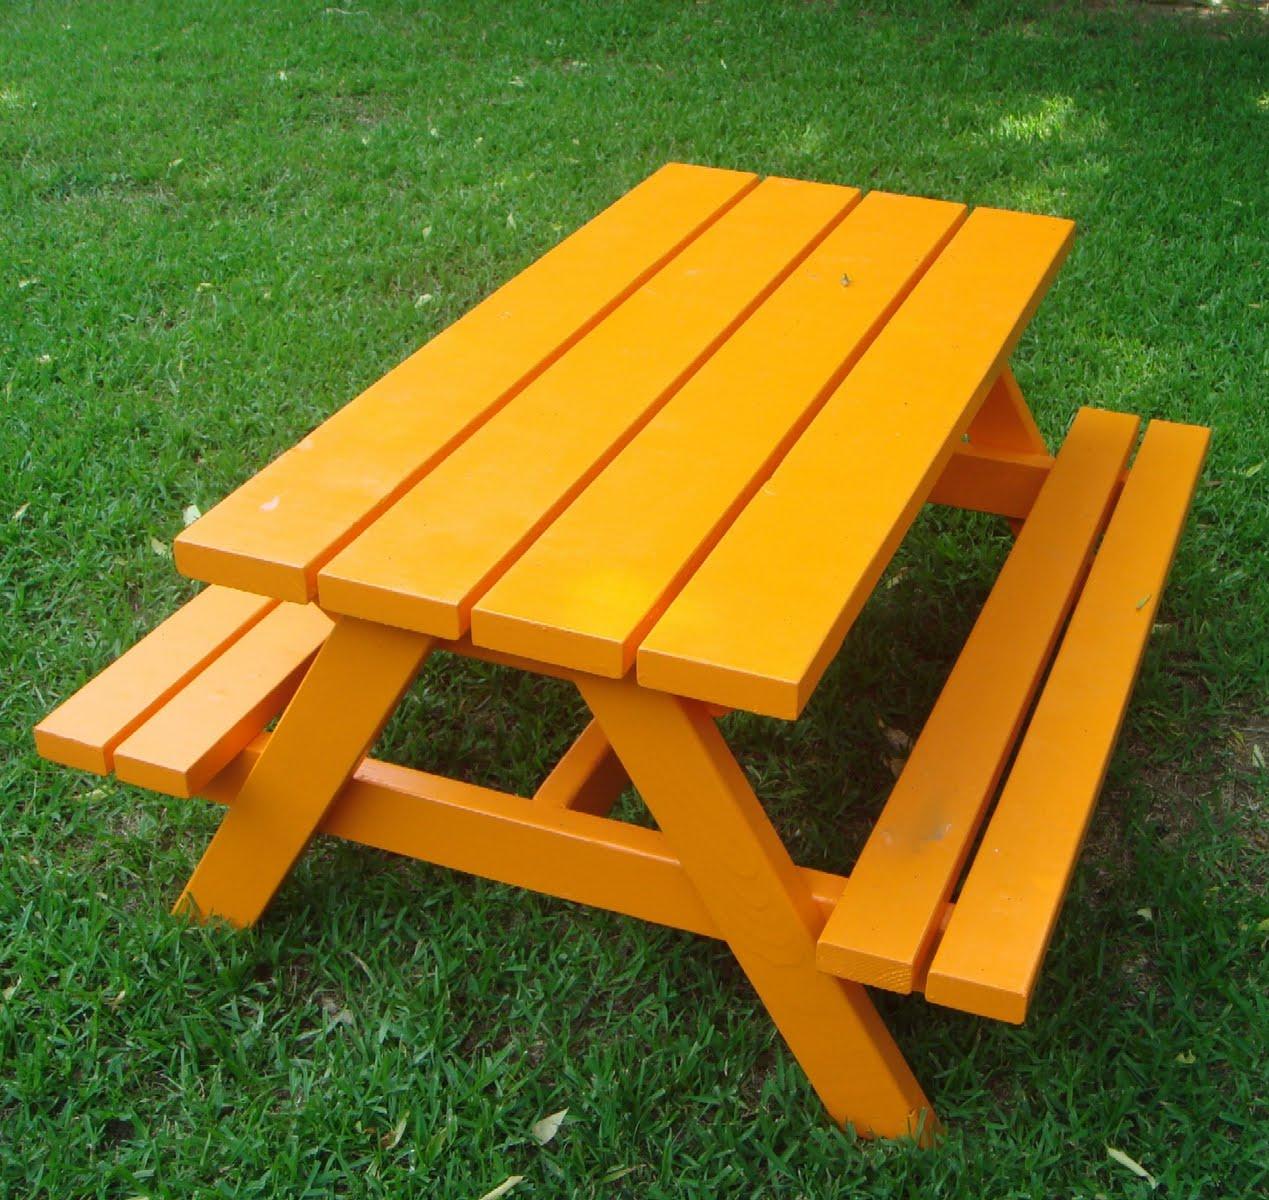 Ana White | Build a Bigger Kid's Picnic Table - DIY Projects